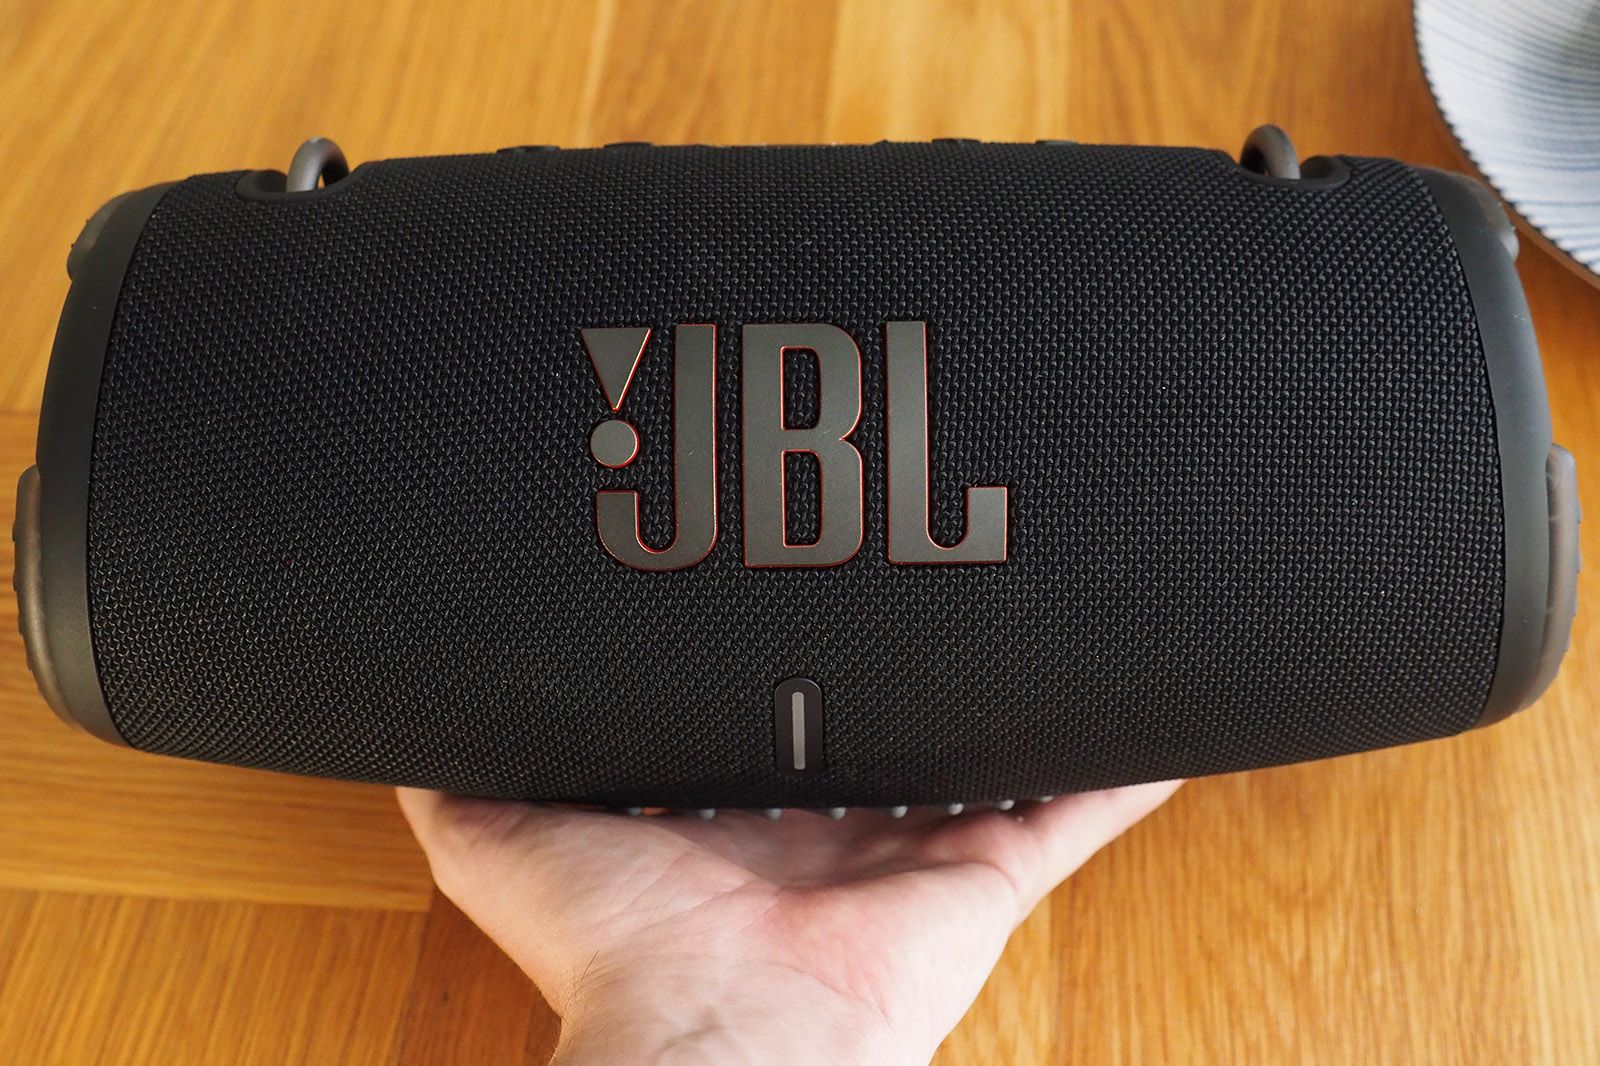 JBL Xtreme 3 BT speaker is one bad boy (review)